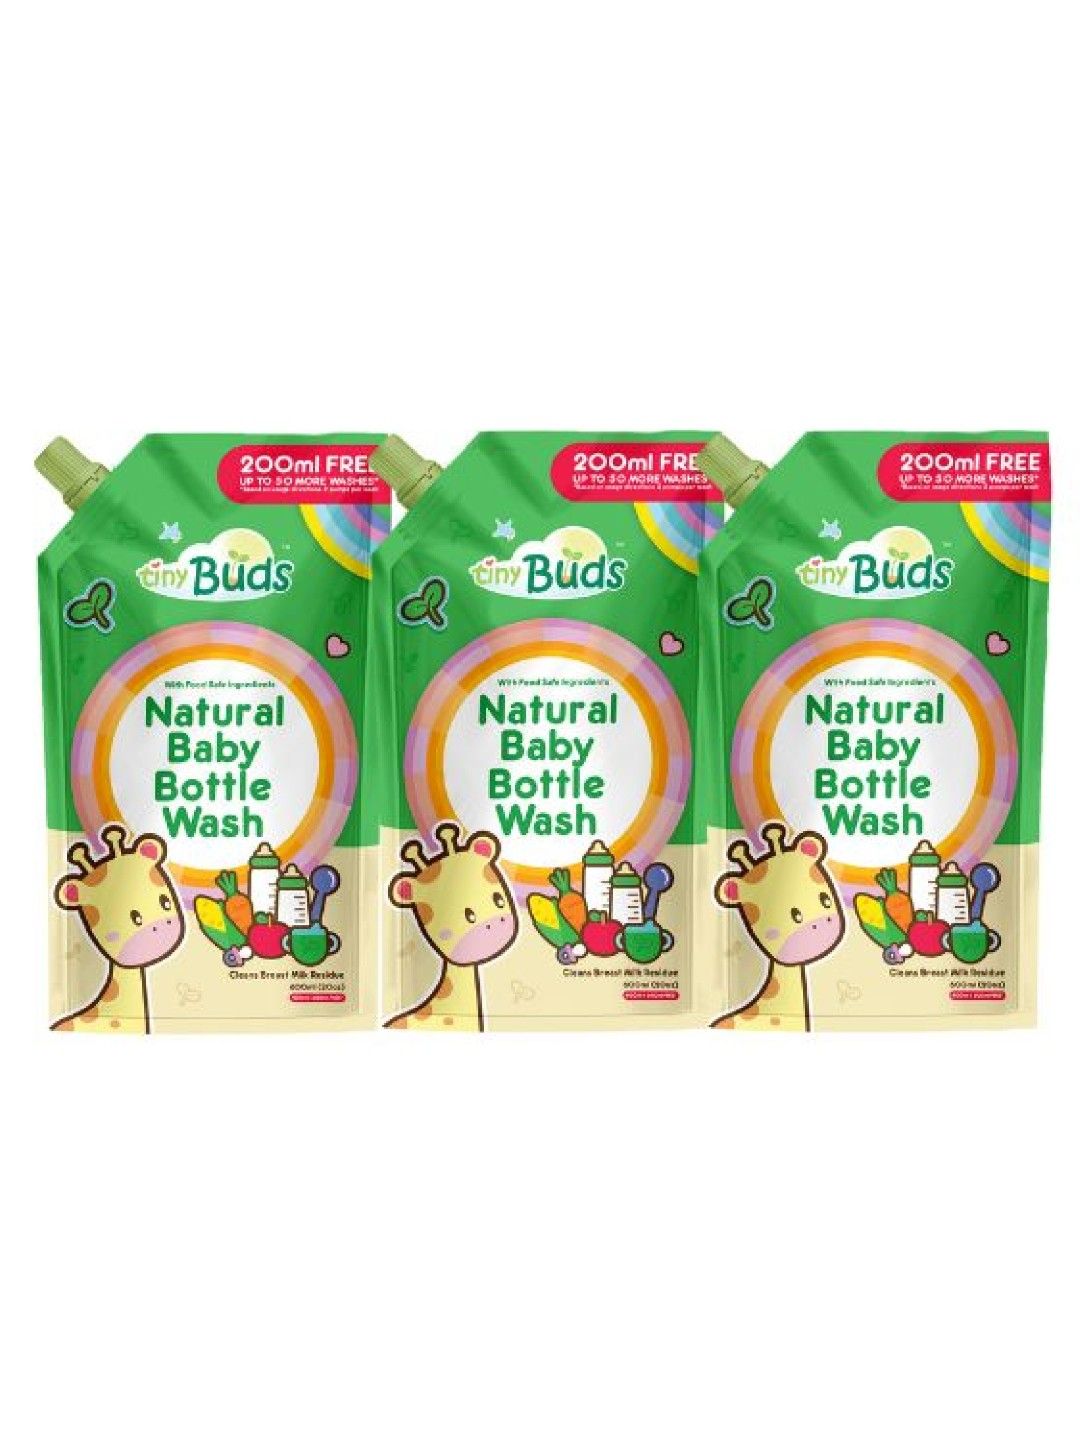 Tiny Buds Natural Baby Bottle Wash Refill 600ml - Bundle of 3